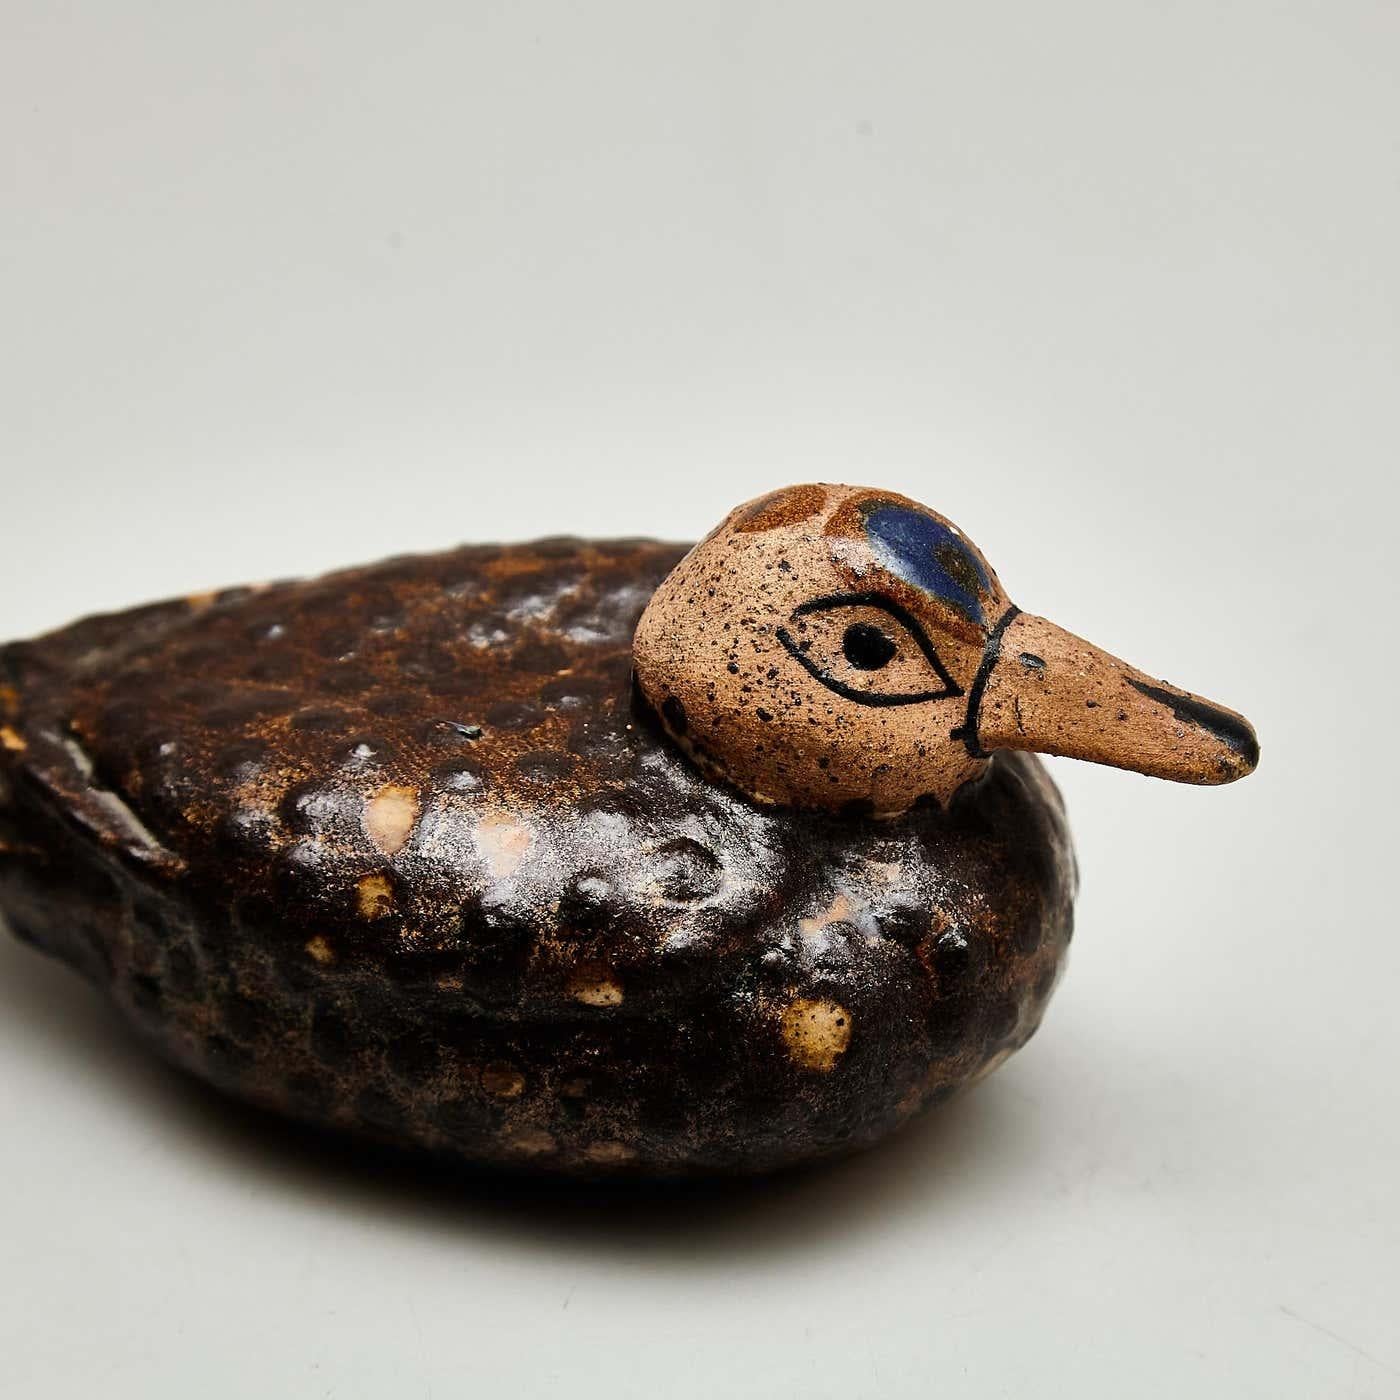 Charming Hand-Painted Ceramic Duck Sculpture - Naif Primitive Art, circa 1940 For Sale 5